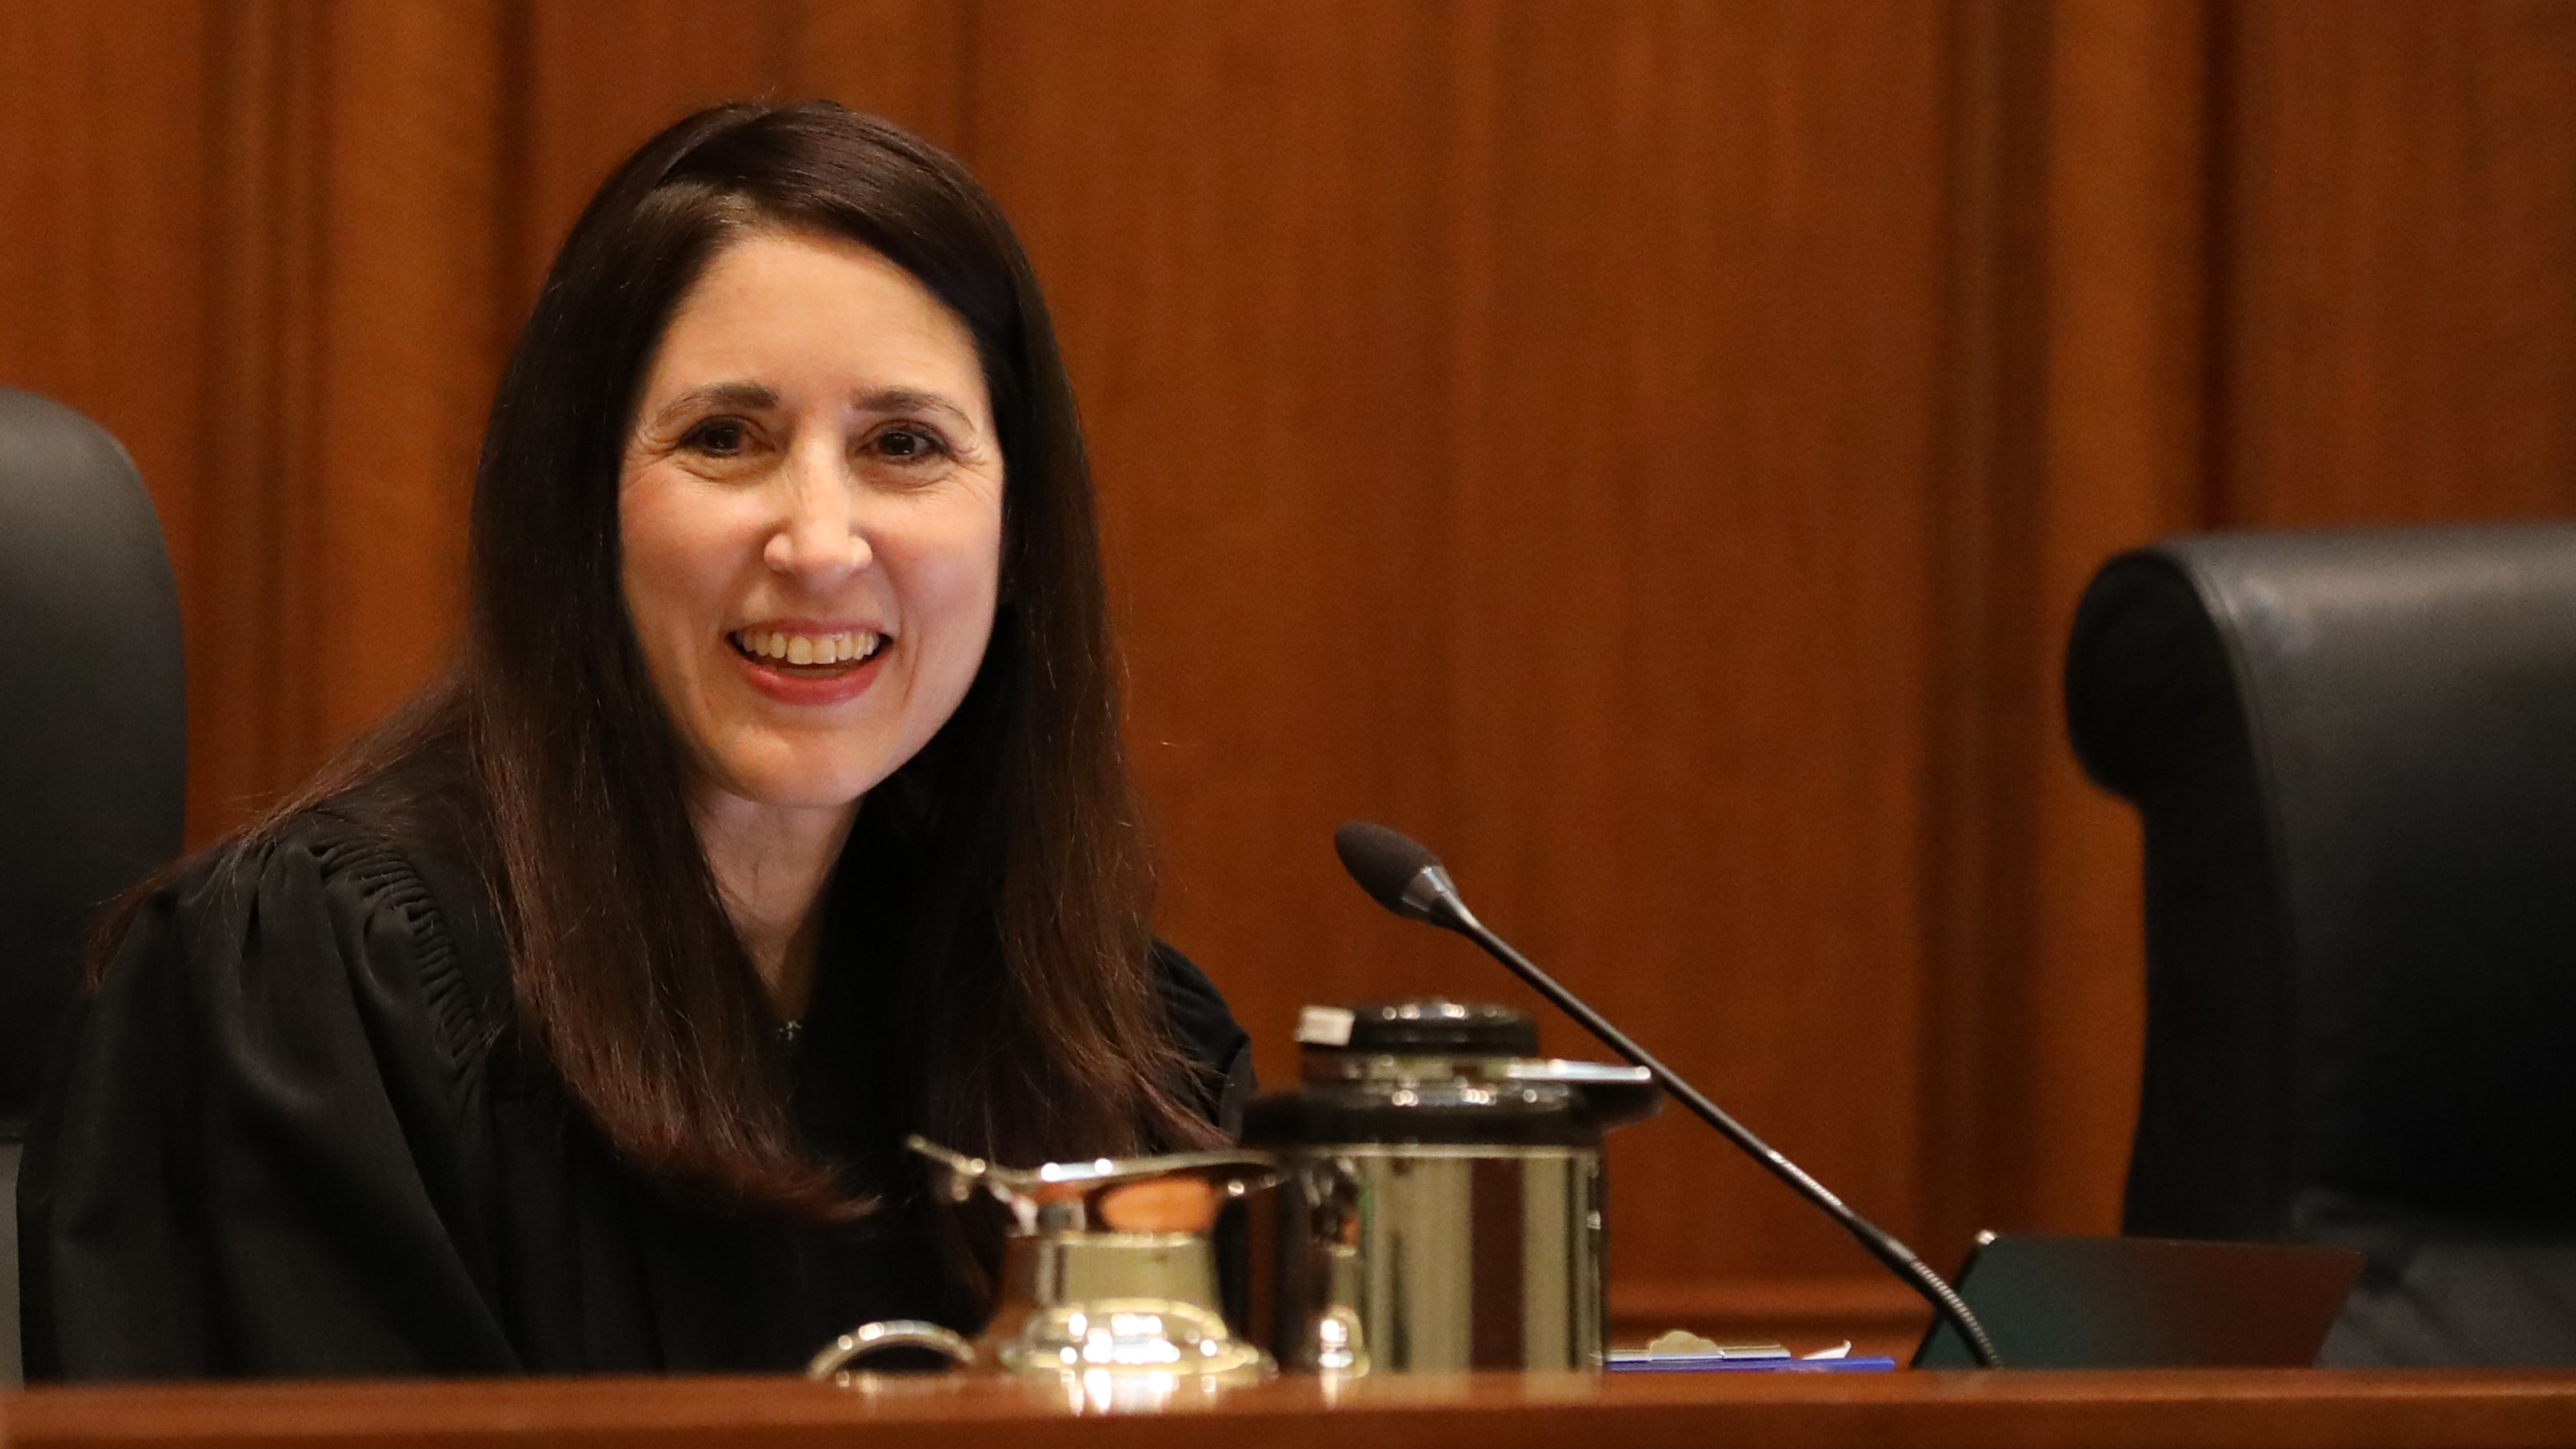 Chief Justice Patricia Guerrero began the oral argument session by welcoming the dozens of students seated in the San Francisco courtroom.